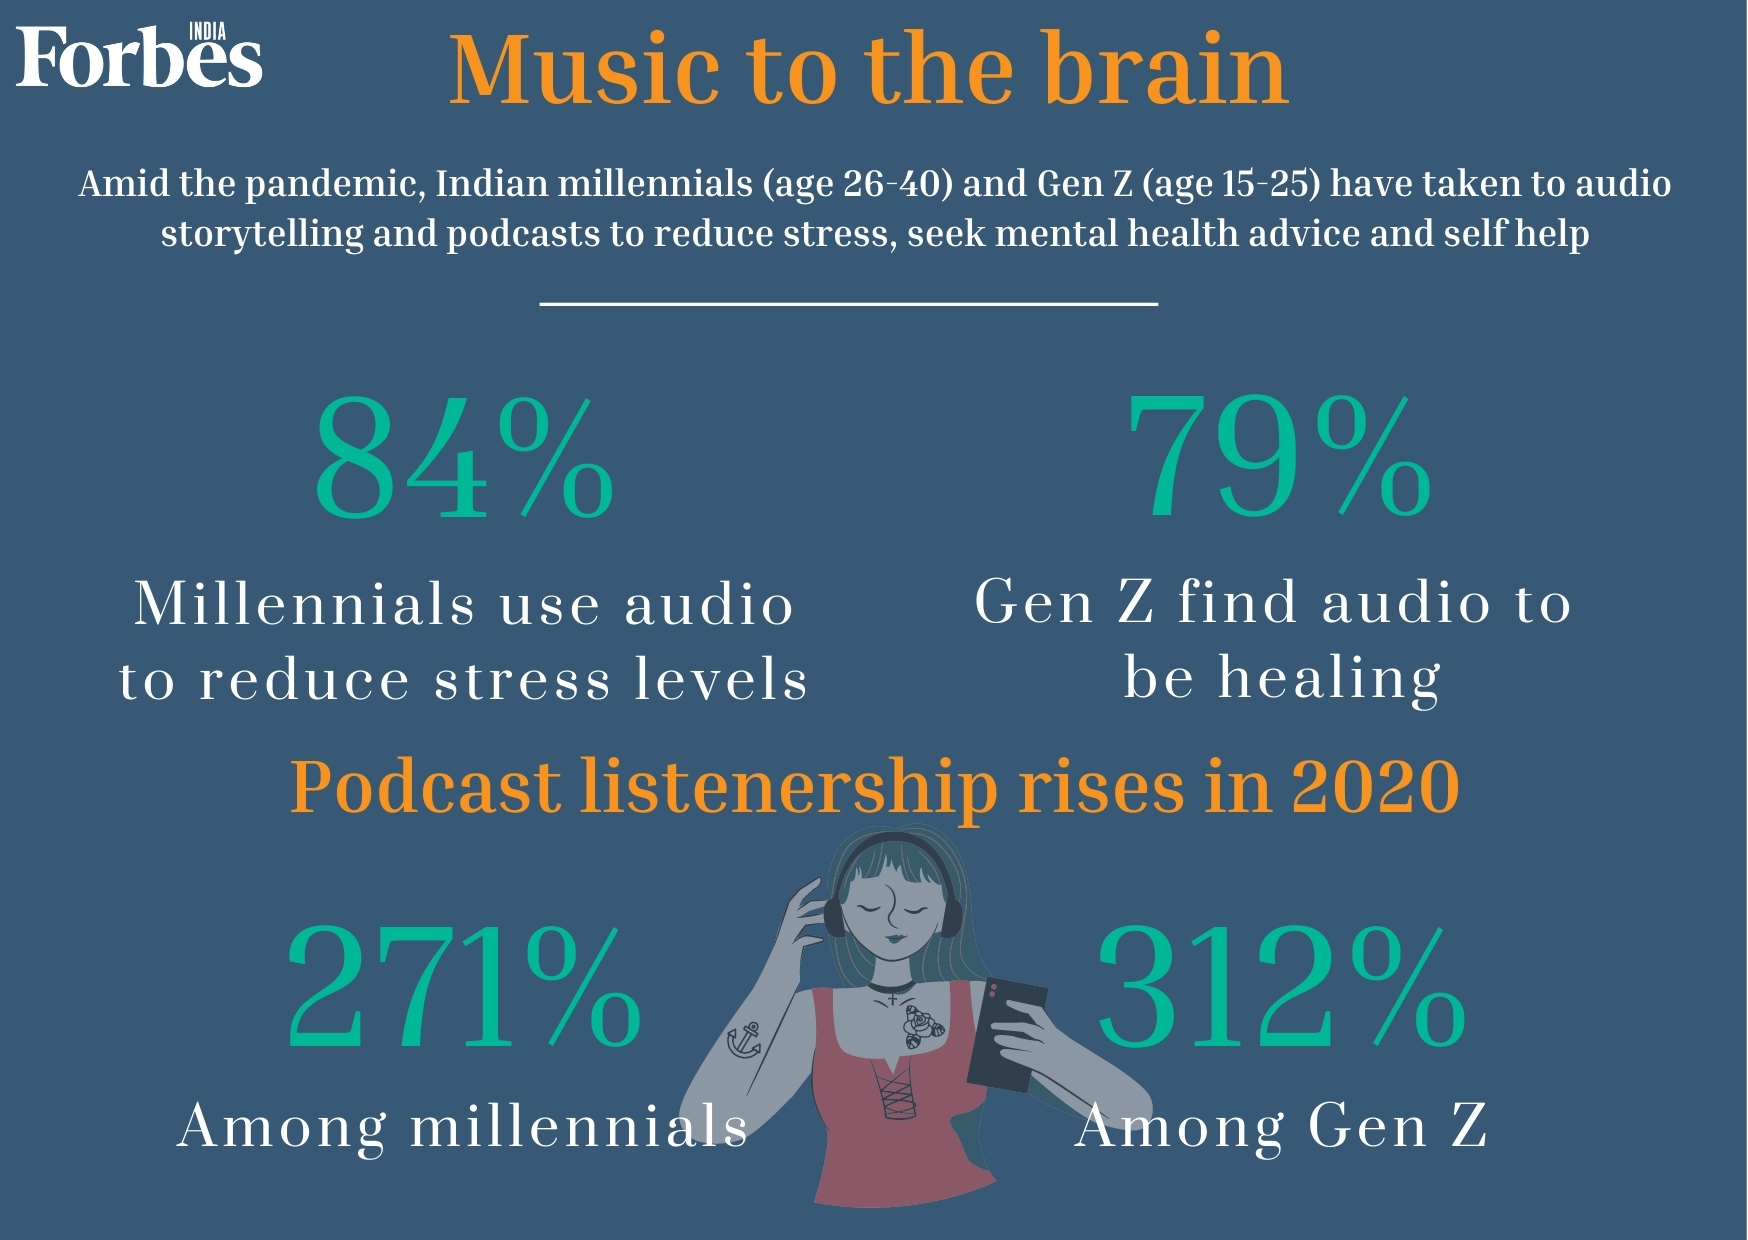 84% millennials use audio to reduce stress; mental health podcasts most popular among India's Gen Z too